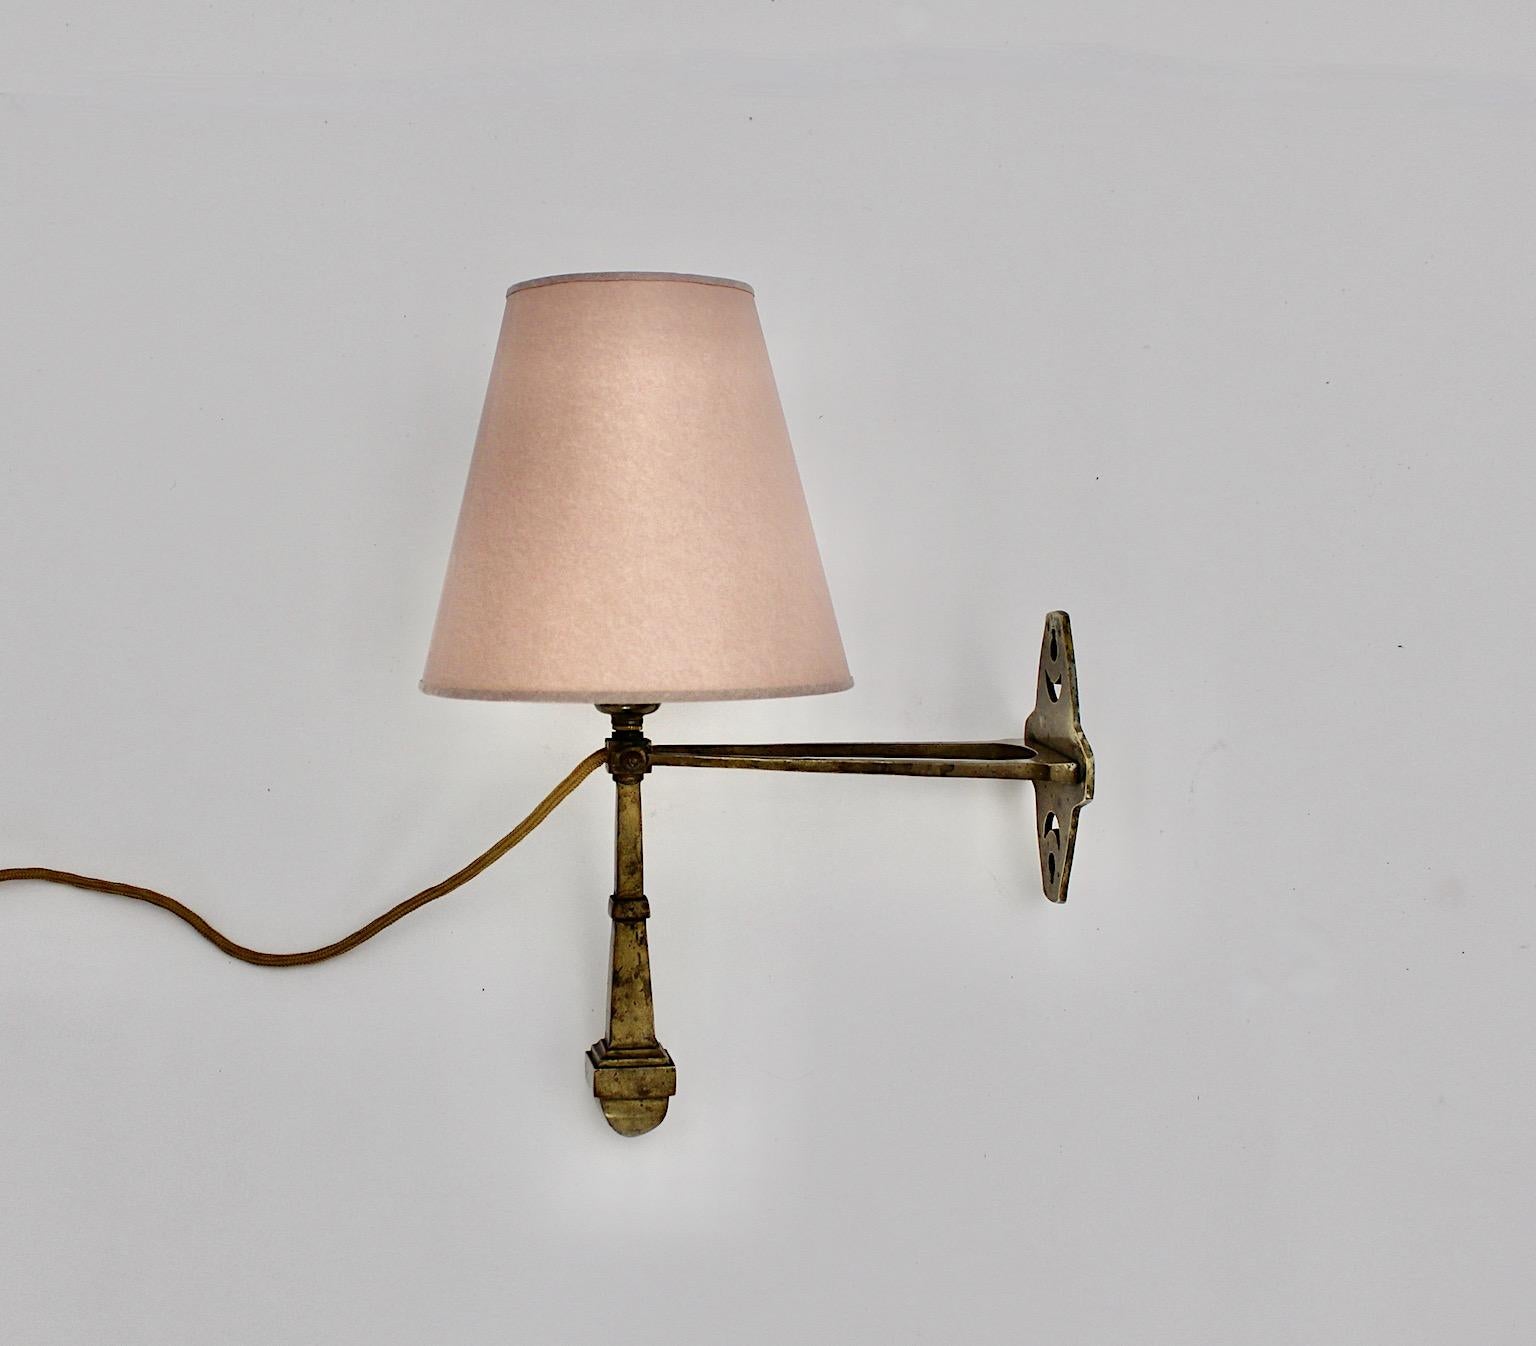 Jugendstil vintage table lamp or wall light from solid brass with a new paper shade in dusty pink circa 1910 Austria.
An amazing table lamp or sconce from solid brass in beautiful golden tone with brass patina topped with a new adjustable lamp